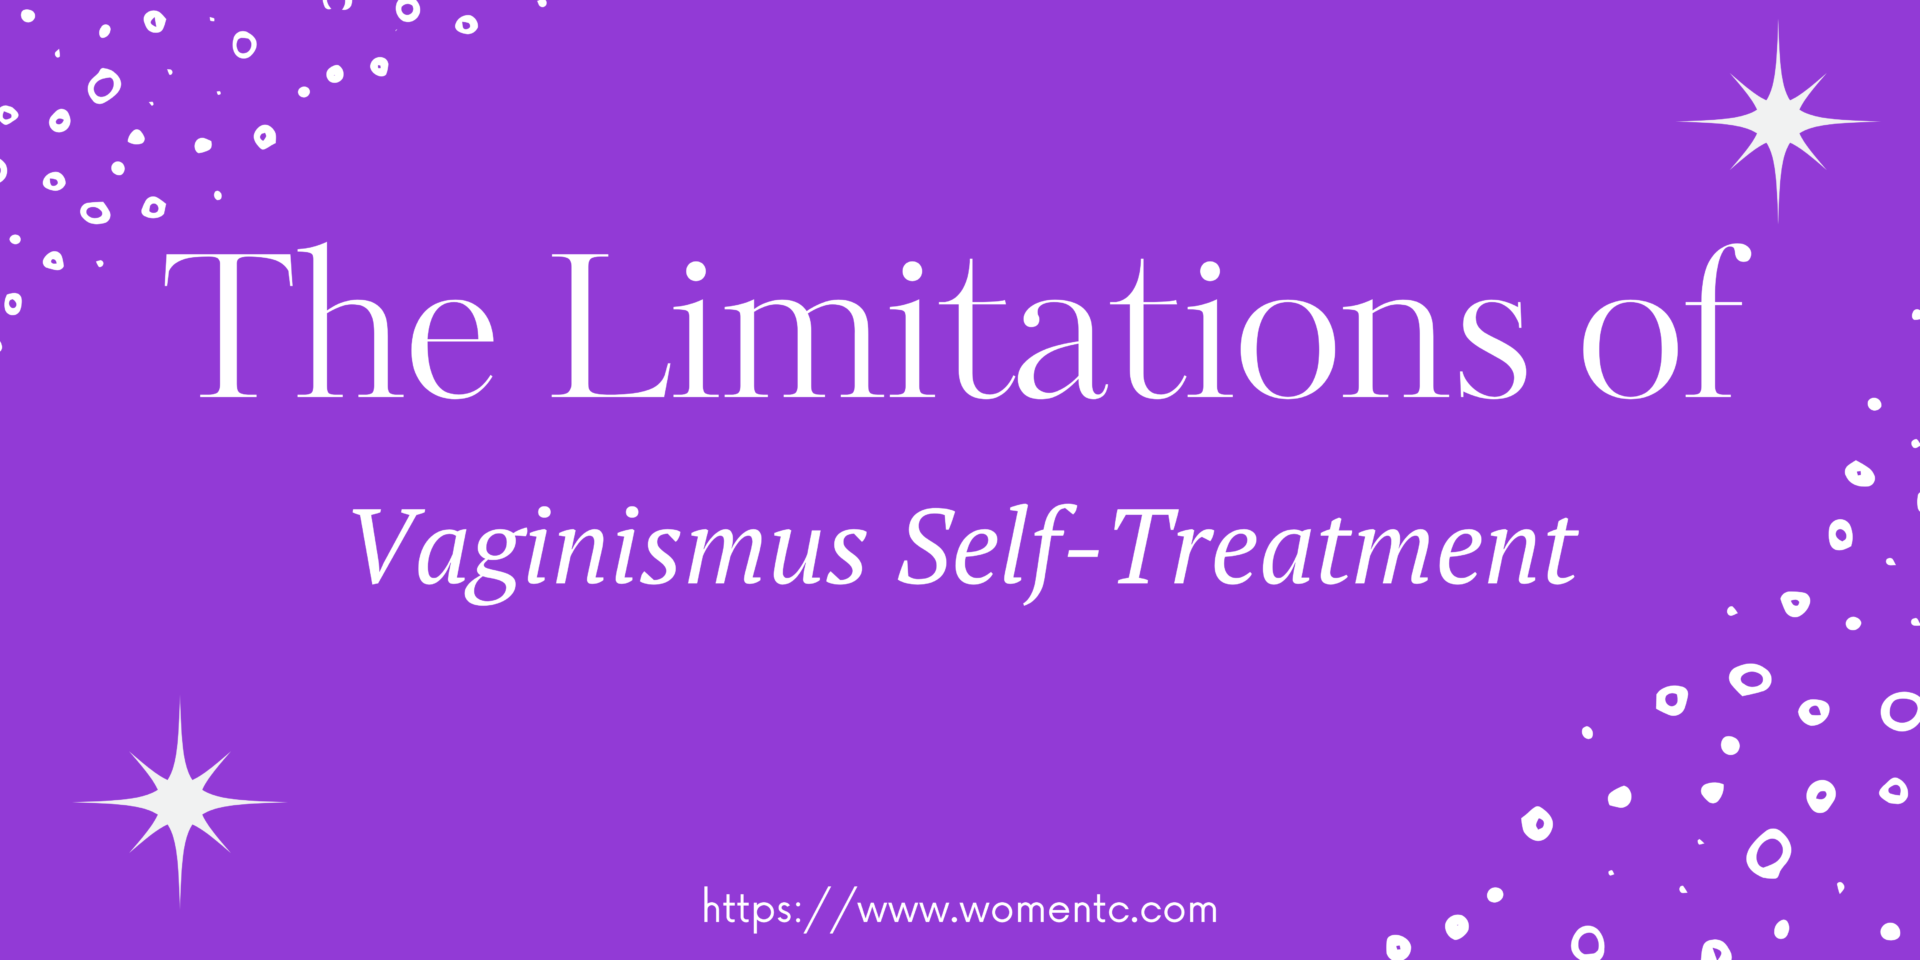 The Limitations of Vaginismus Self-Treatment